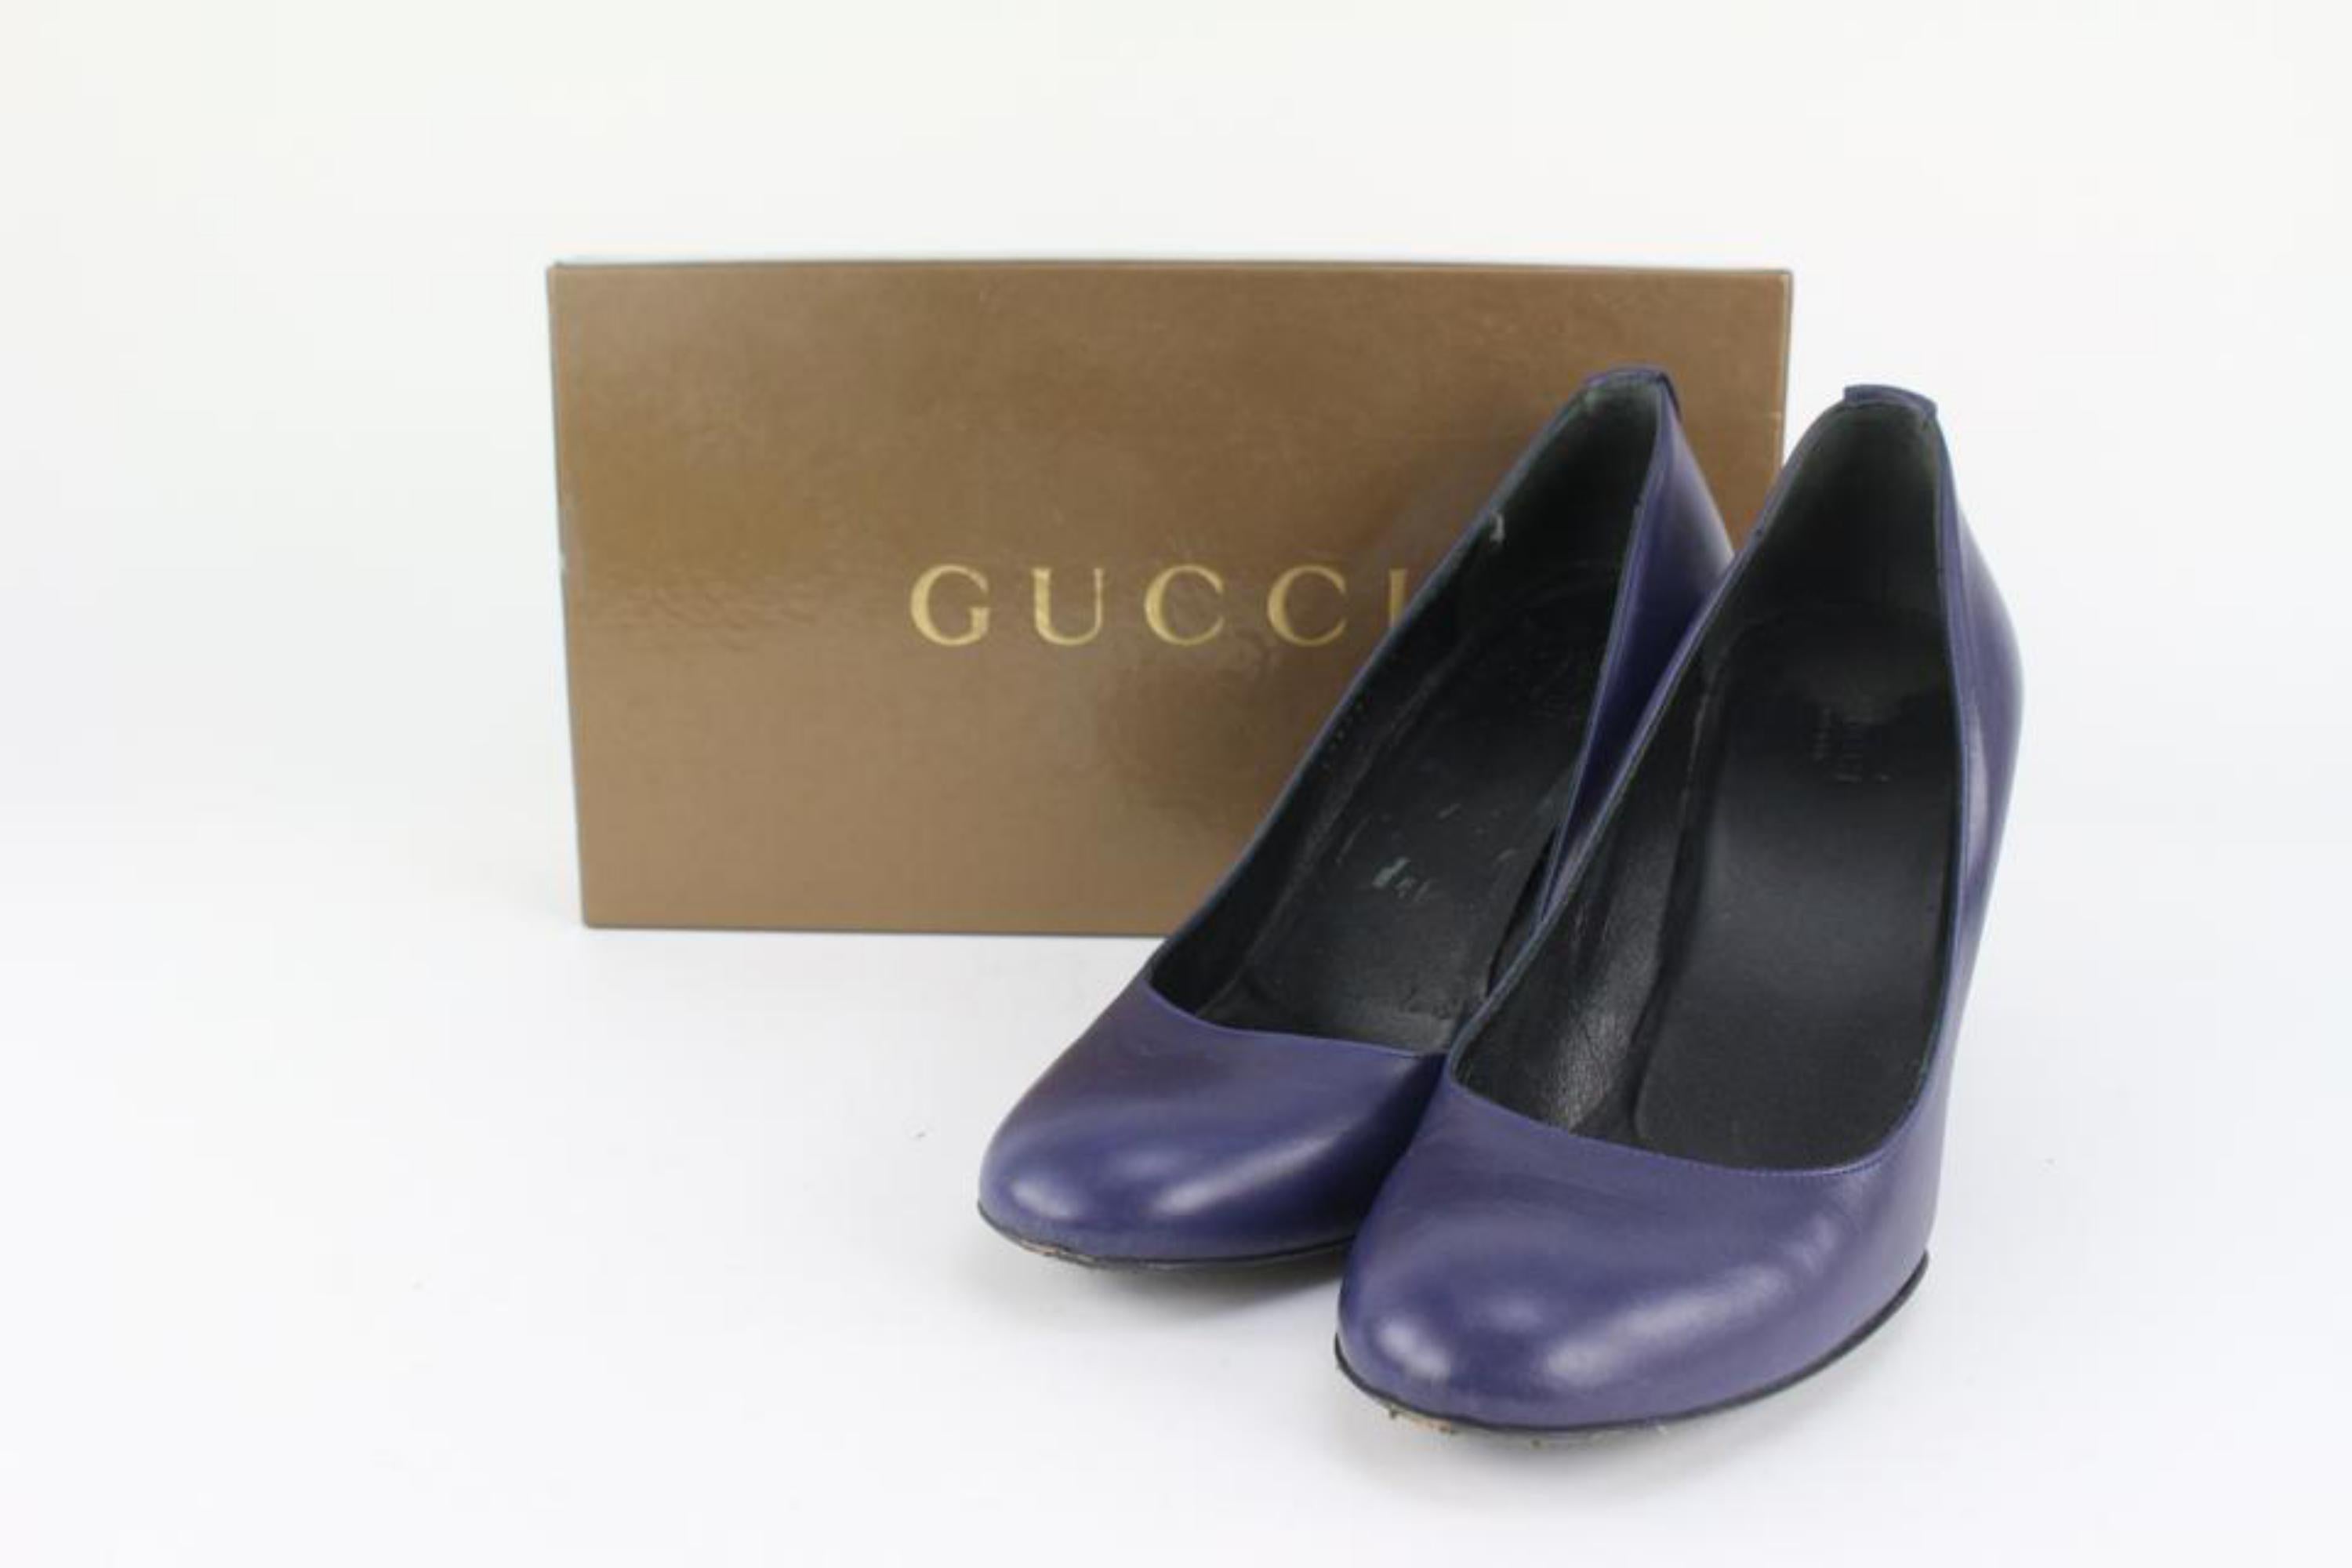 Gucci Sz 38 Purple Interlocking GG Wedges 127g31
Date Code/Serial Number: 247533
Made In: Italy
Measurements: Length:  9.75